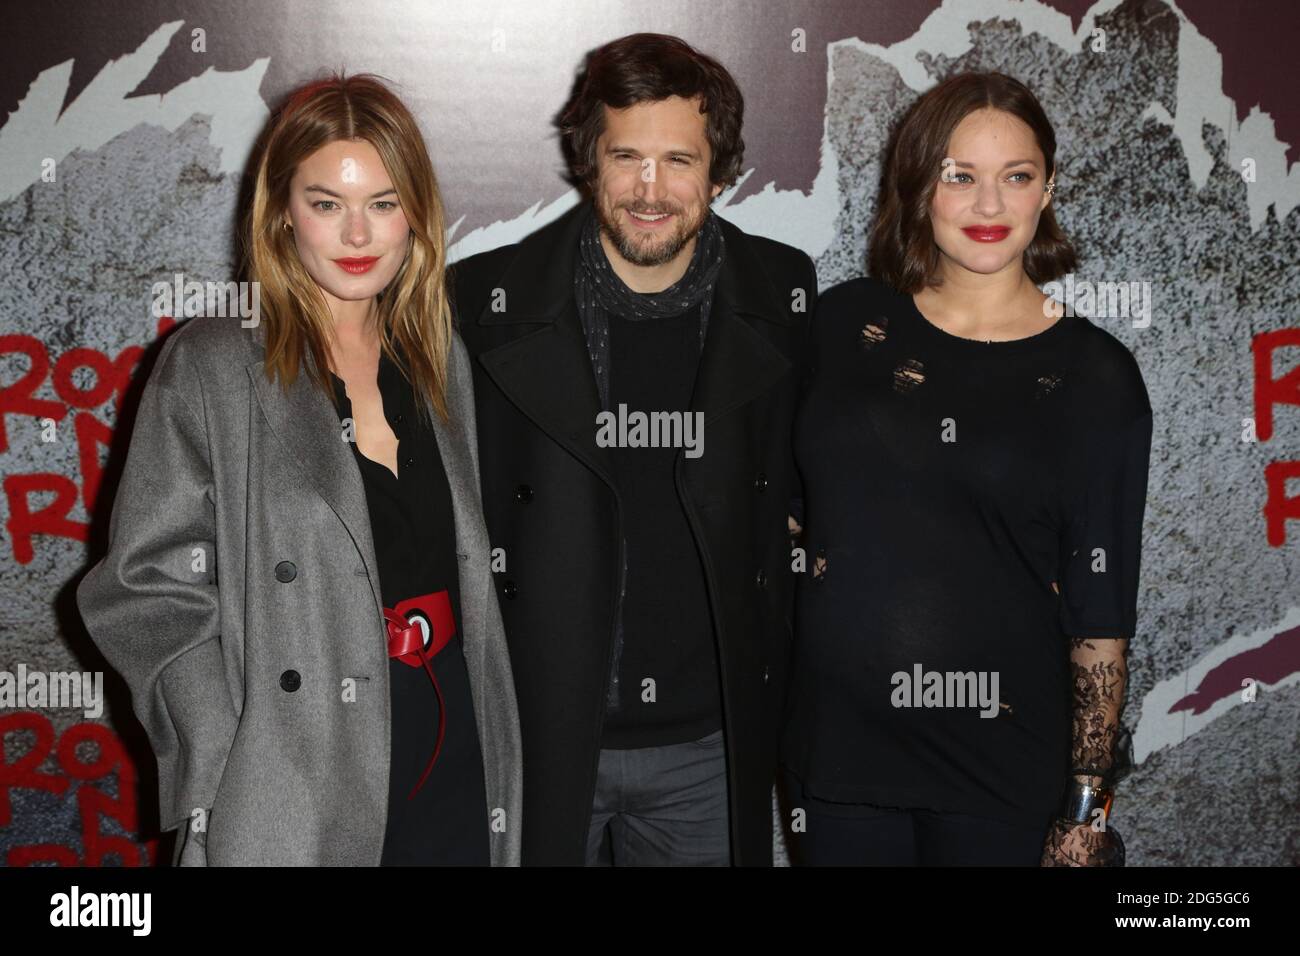 Camille Rowe, Guillaume Canet and his wife Marion Cotillard attending the Rock  N Roll Paris premiere